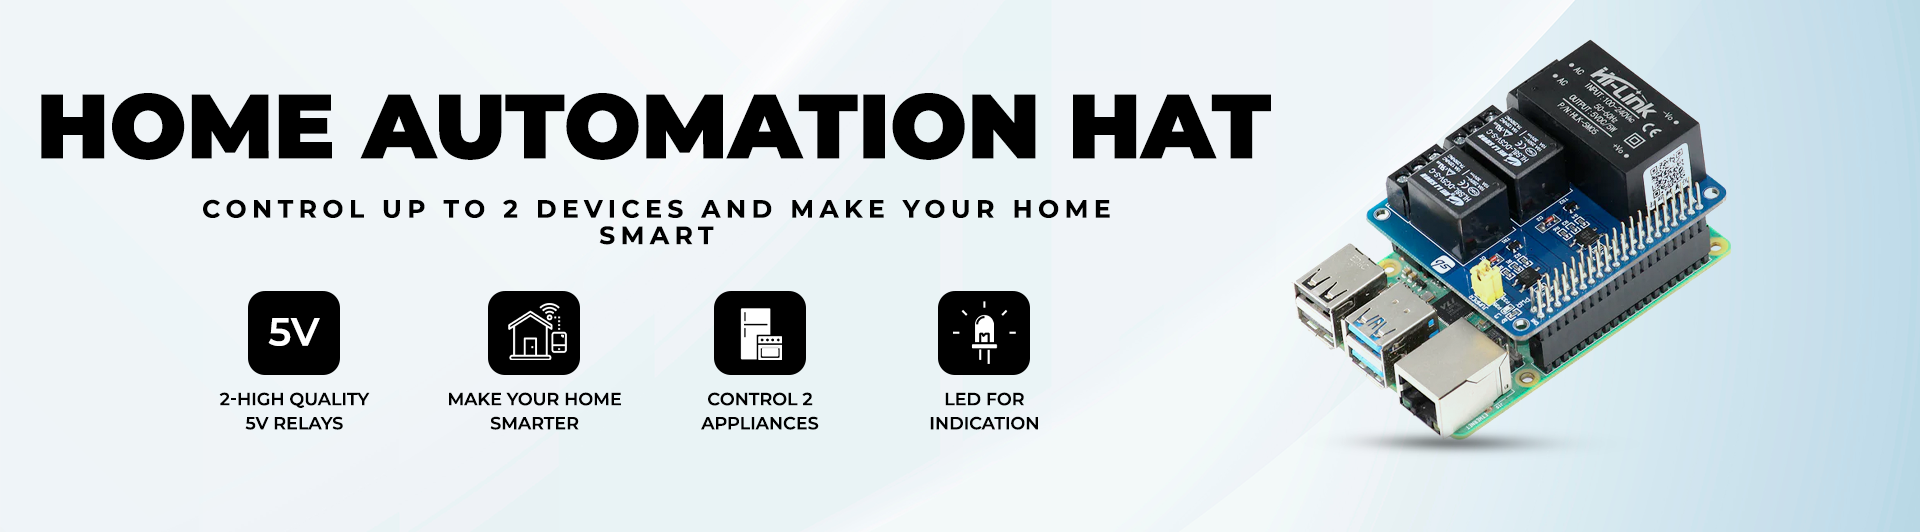 Home Automation HAT